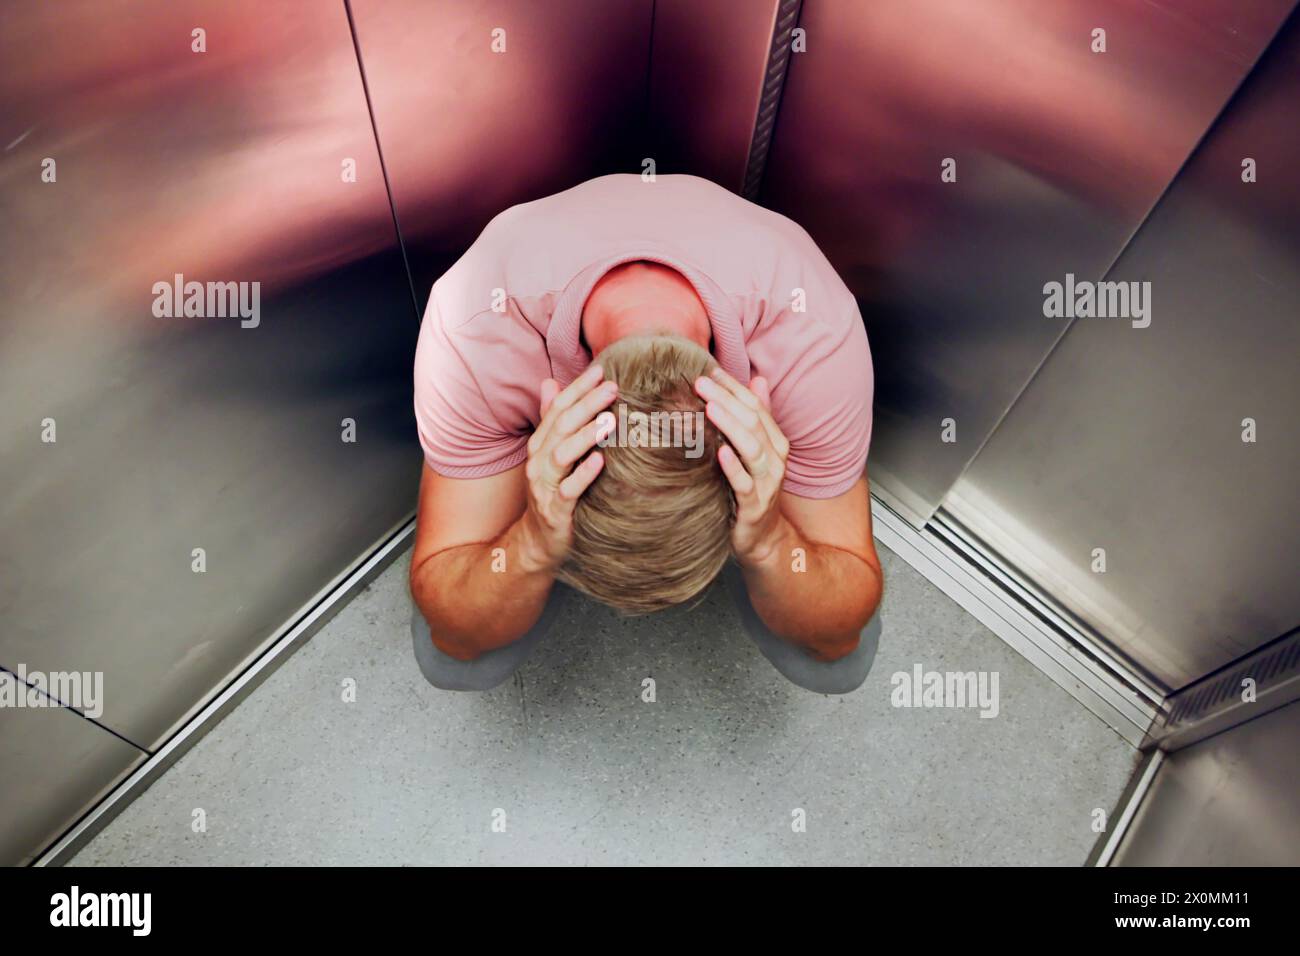 Man Trapped Inside Elevator: Overcoming Claustrophobia and Fear Stock Photo